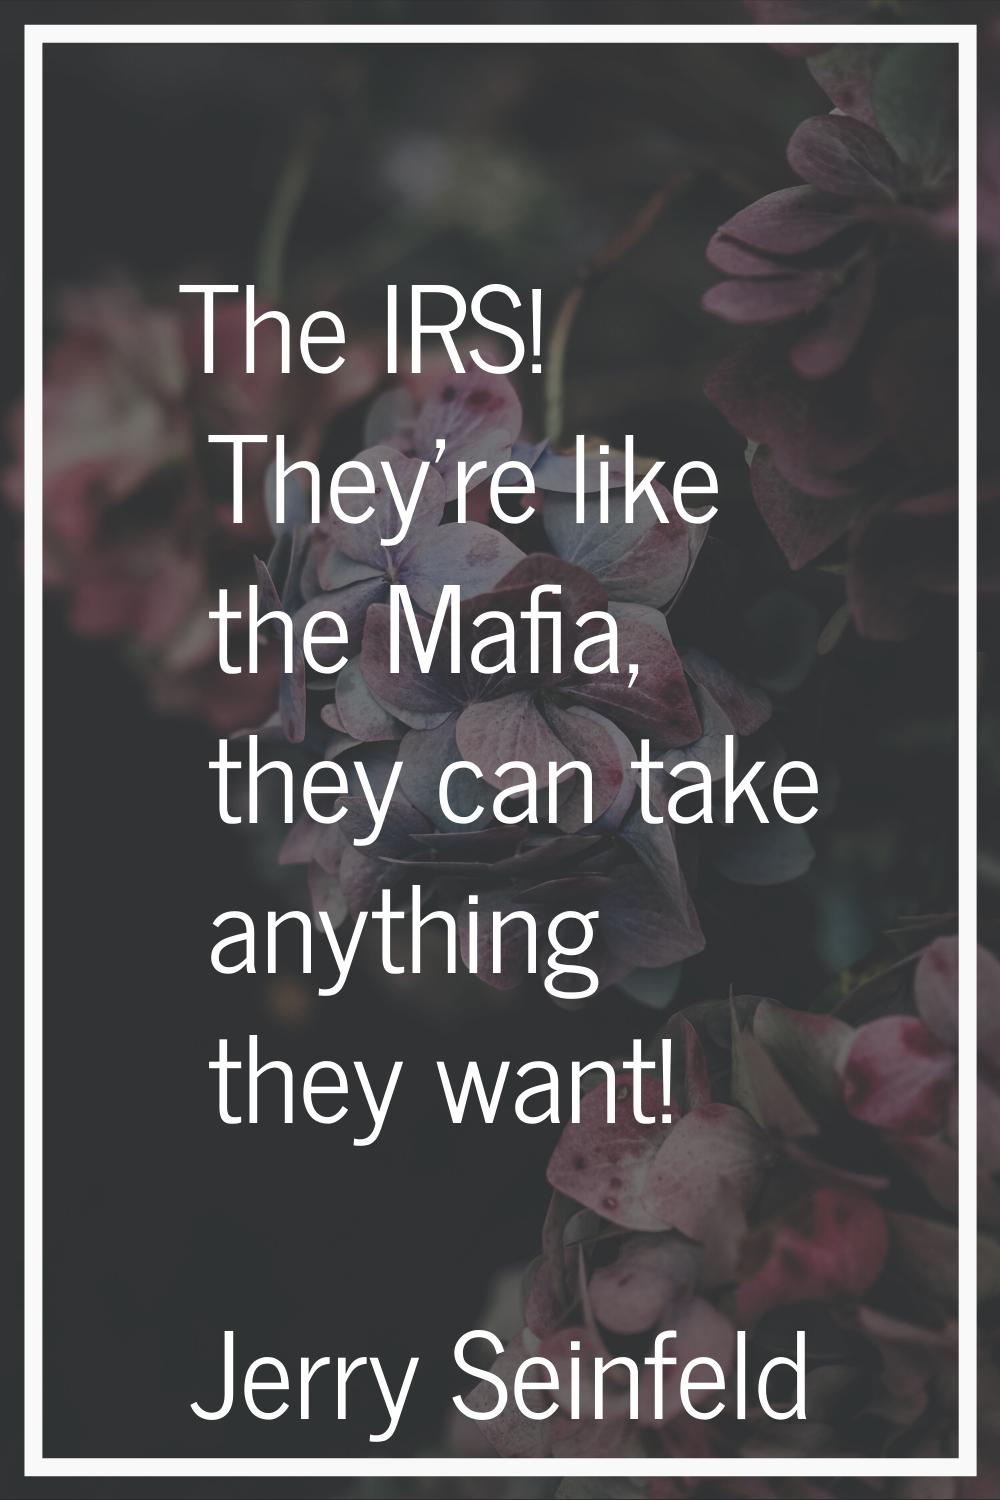 The IRS! They're like the Mafia, they can take anything they want!